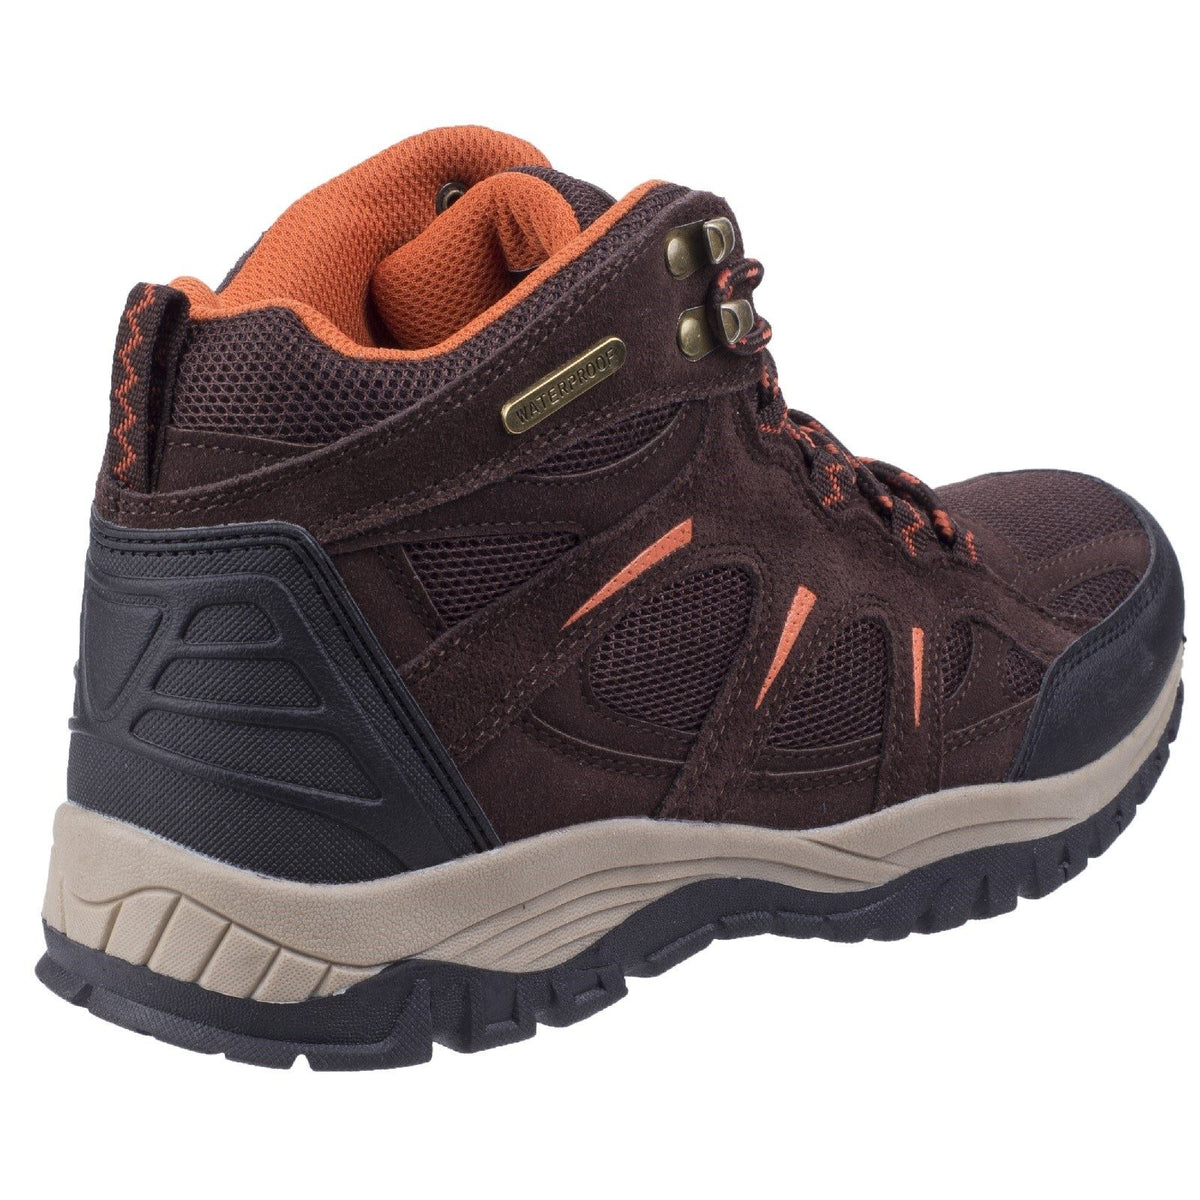 Cotswold Stowell Hiking Boots